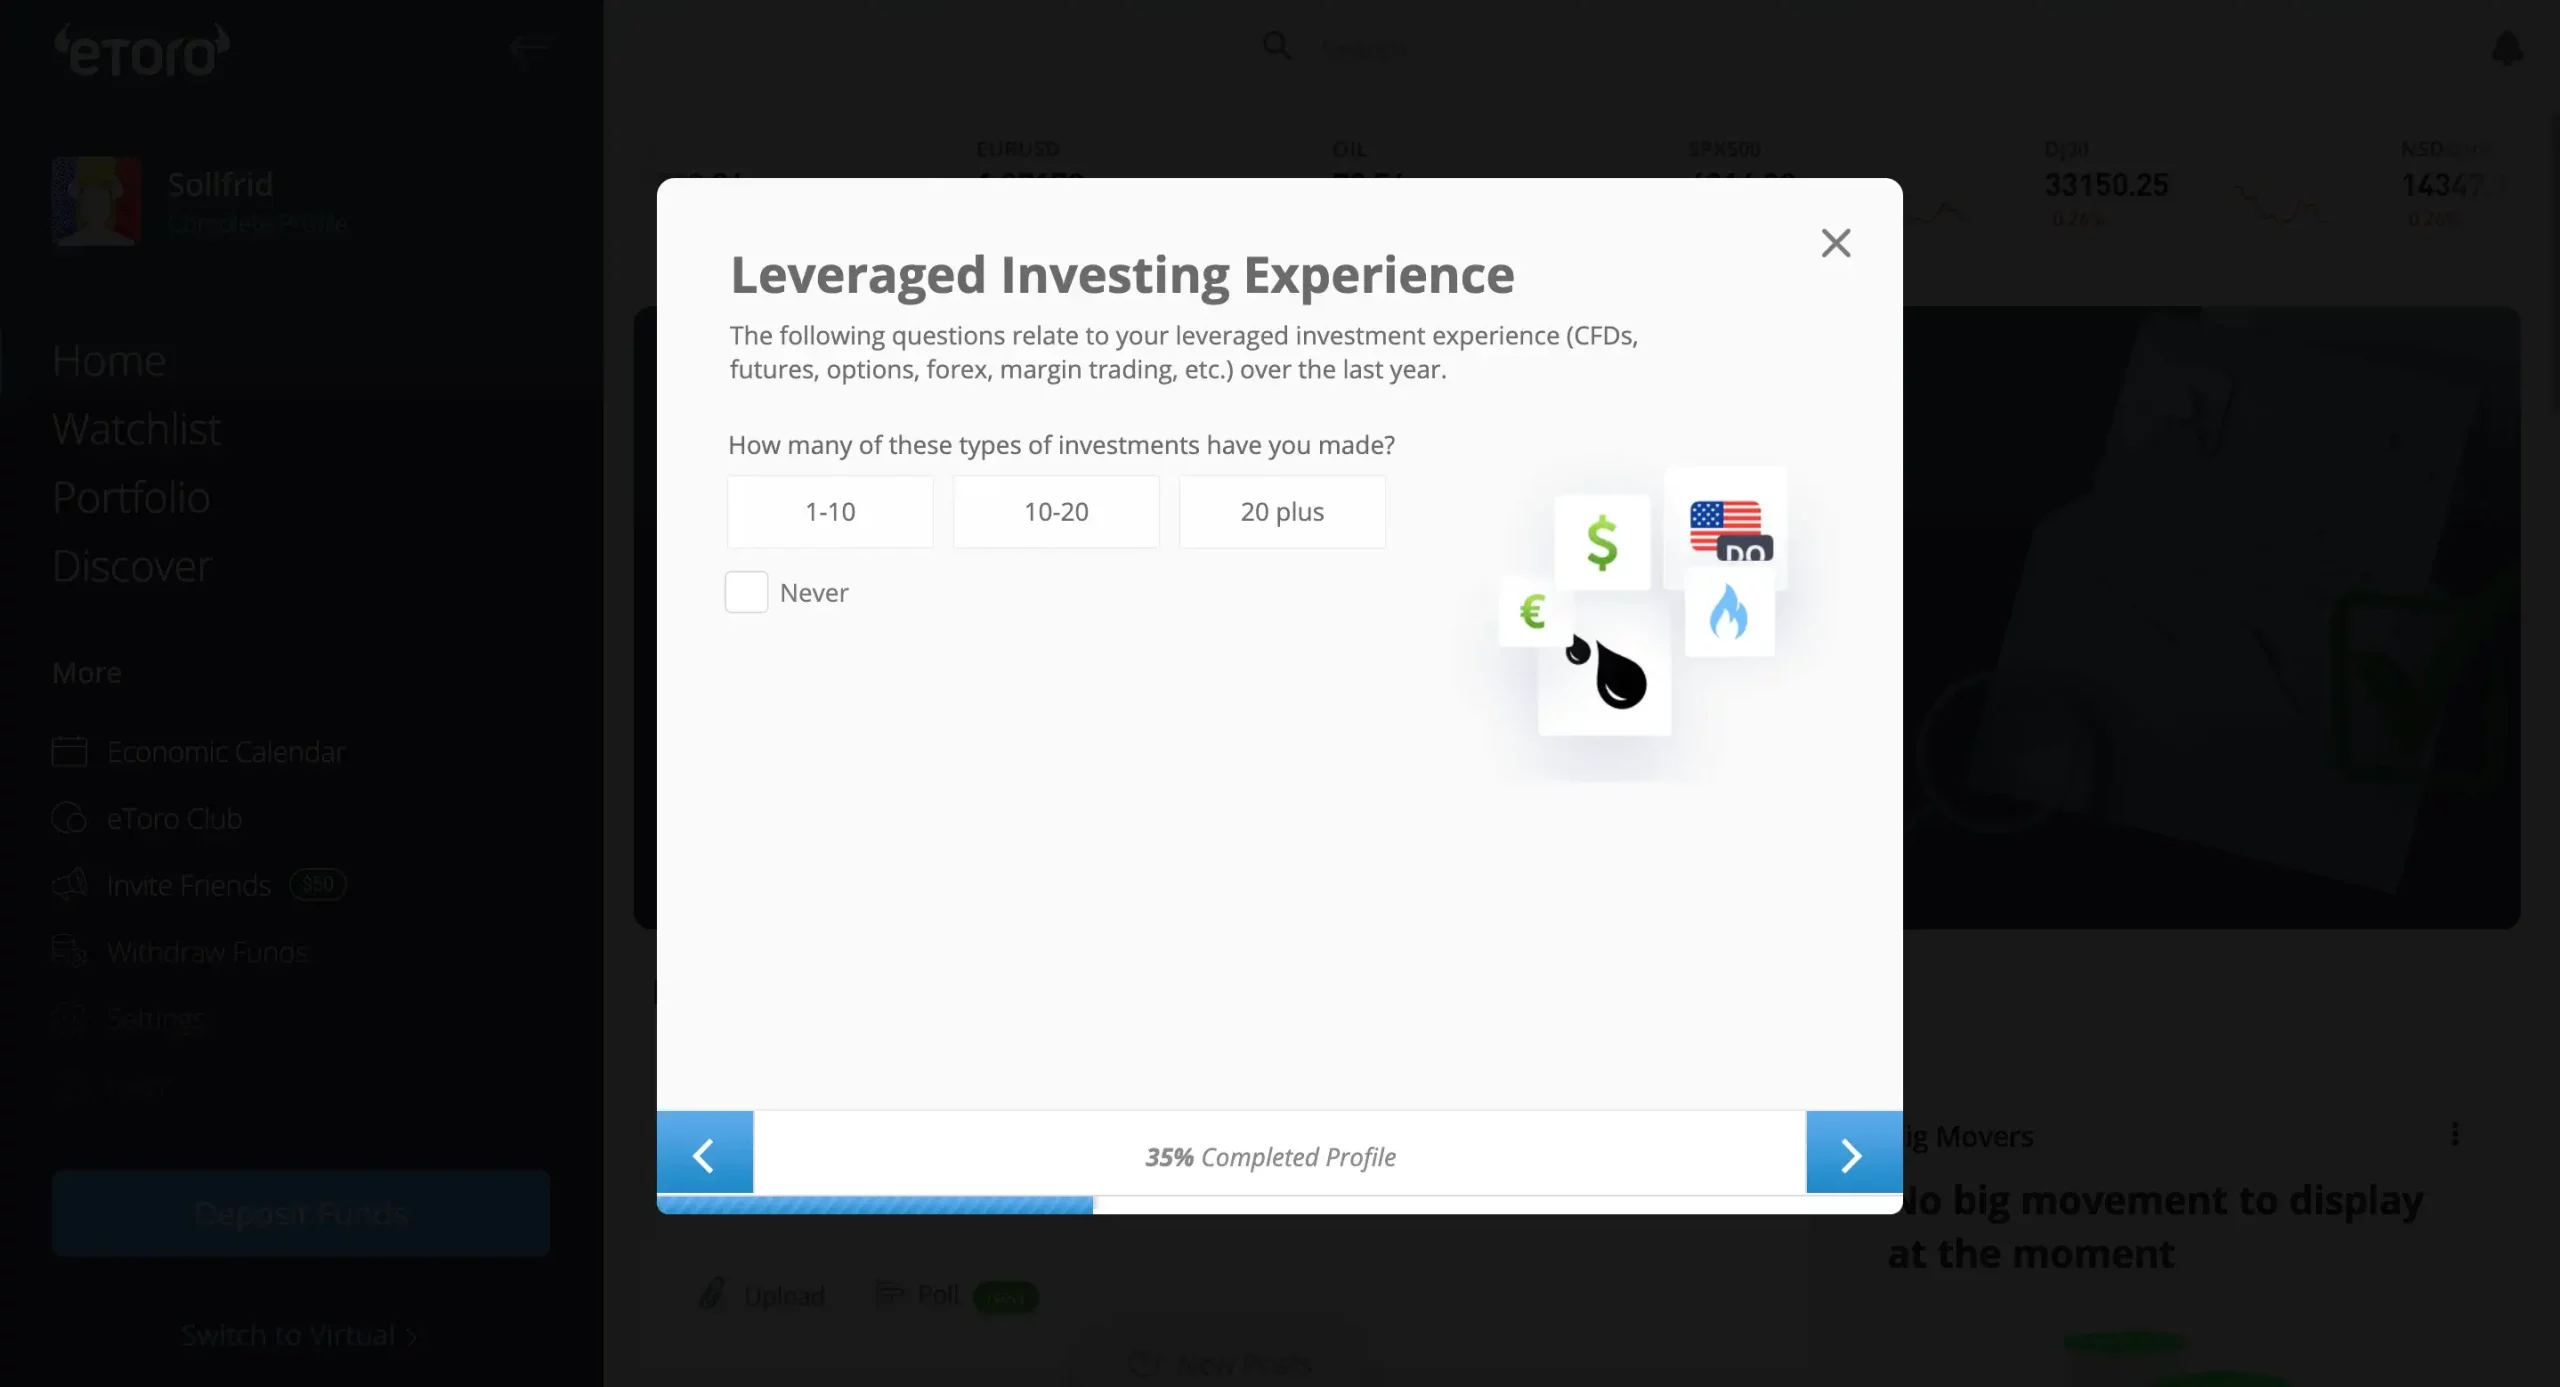 Step 1.11: Choose the leveraged investing experience 